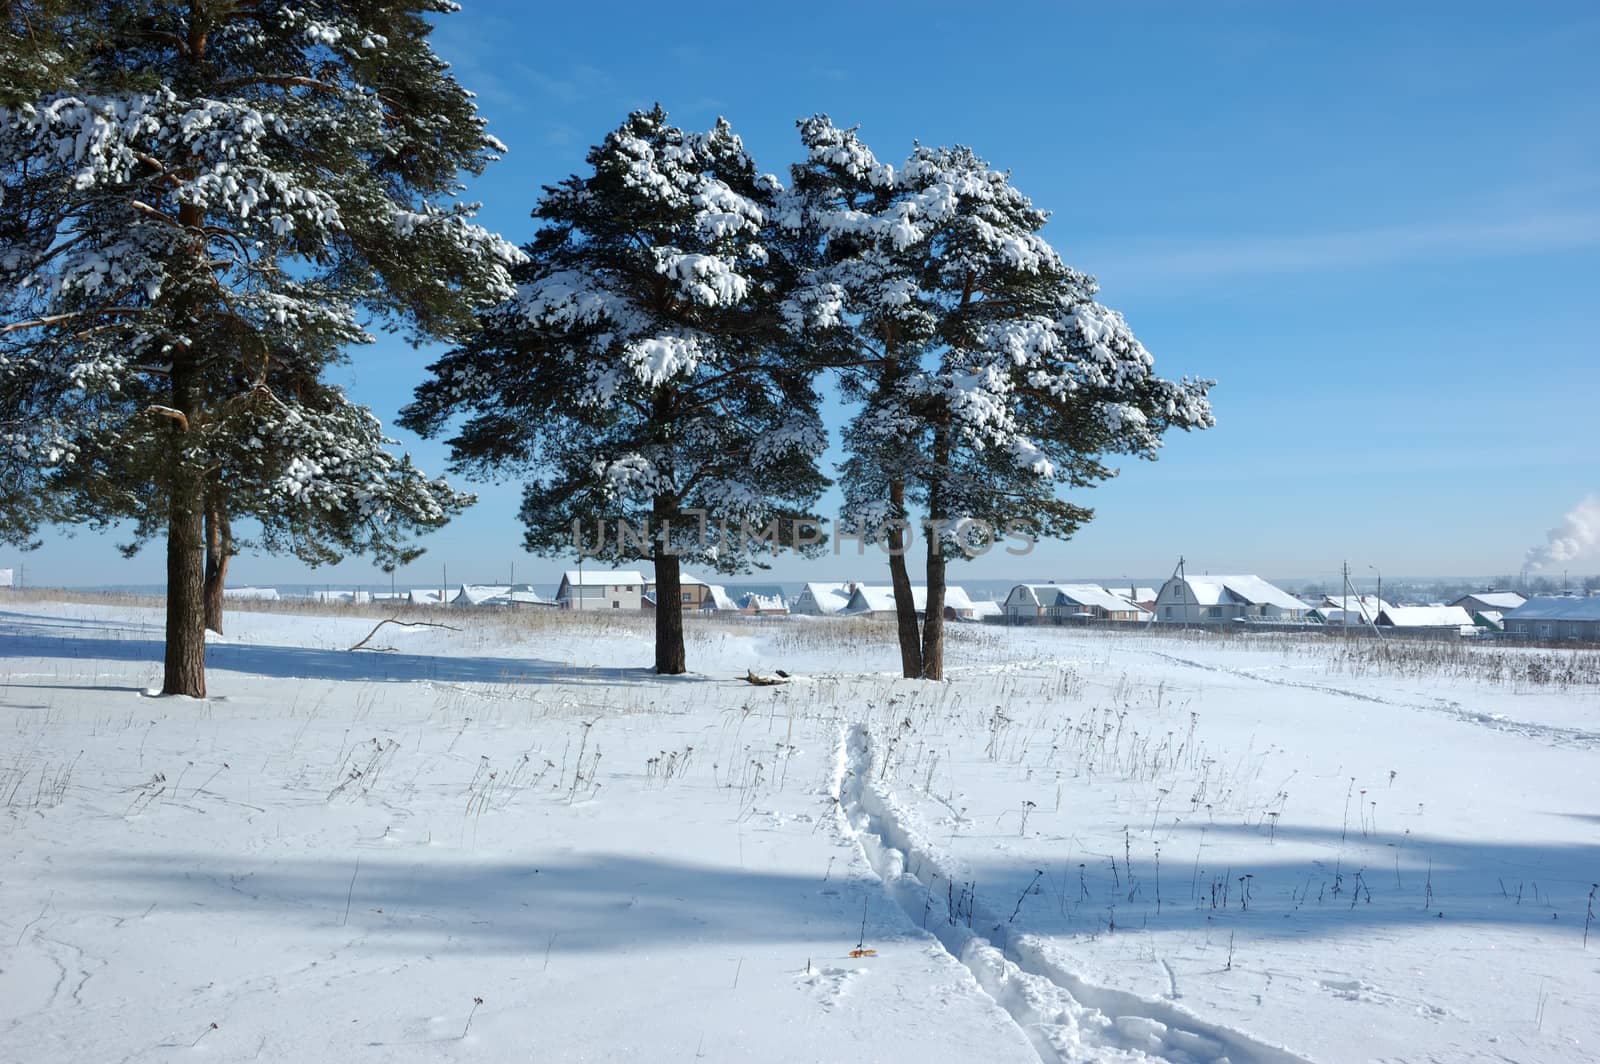 Outskirts of small town with snowy pine trees at winter sunny day